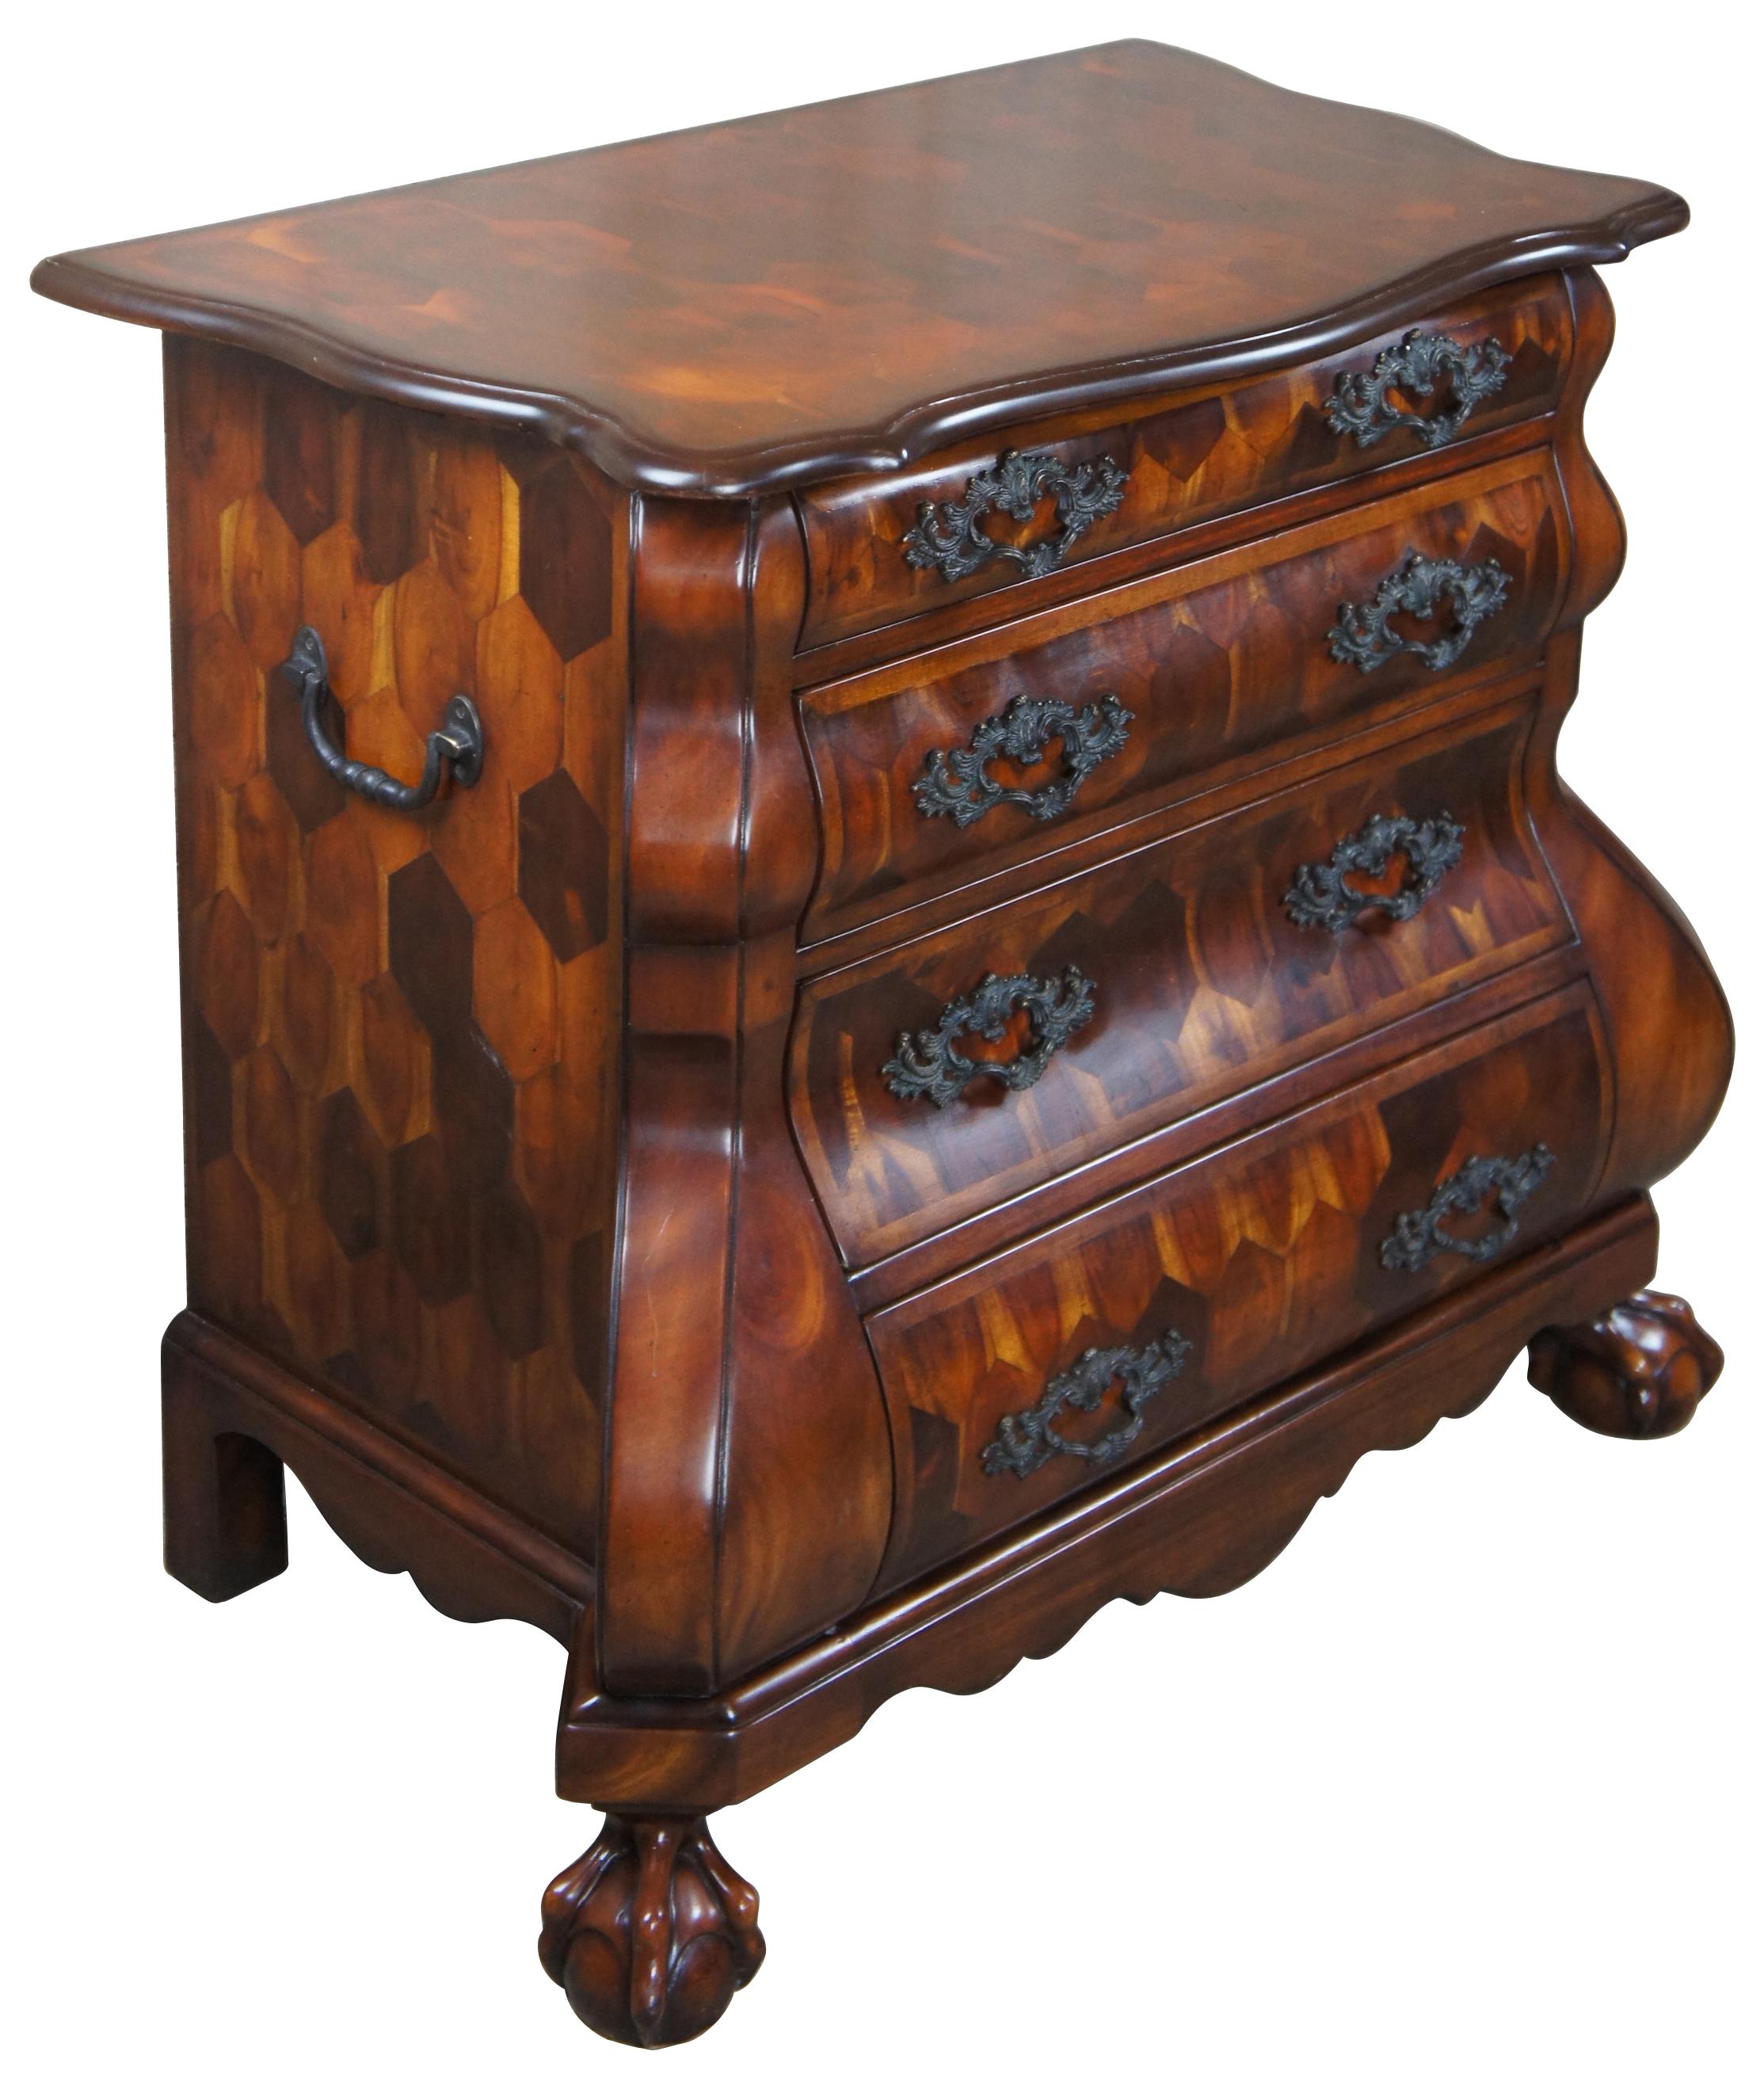 Theodore Alexander Dutch bombe chest. Influenced by a combination of 18th century Dutch and Chippendale styling. Features a serpentine design made from mahogany with four drawers, ornate hardware, ball and claw feet and geometric parquetry finish. A